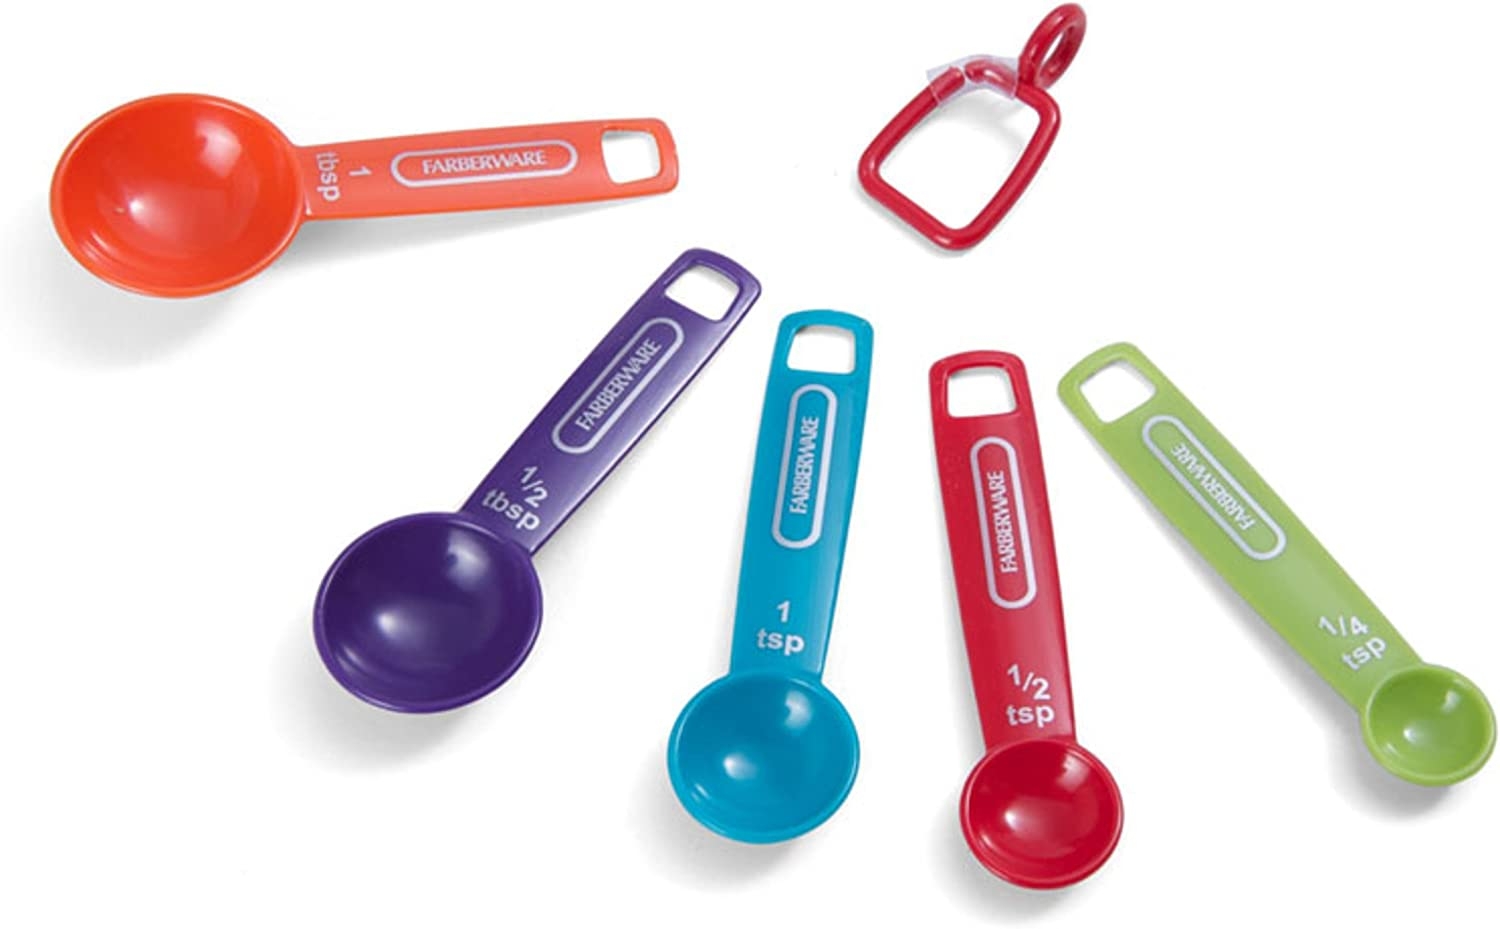 Farberware Professional Plastic Measuring Spoons, Set of 5, Colors may vary Import To Shop ×Product customization General